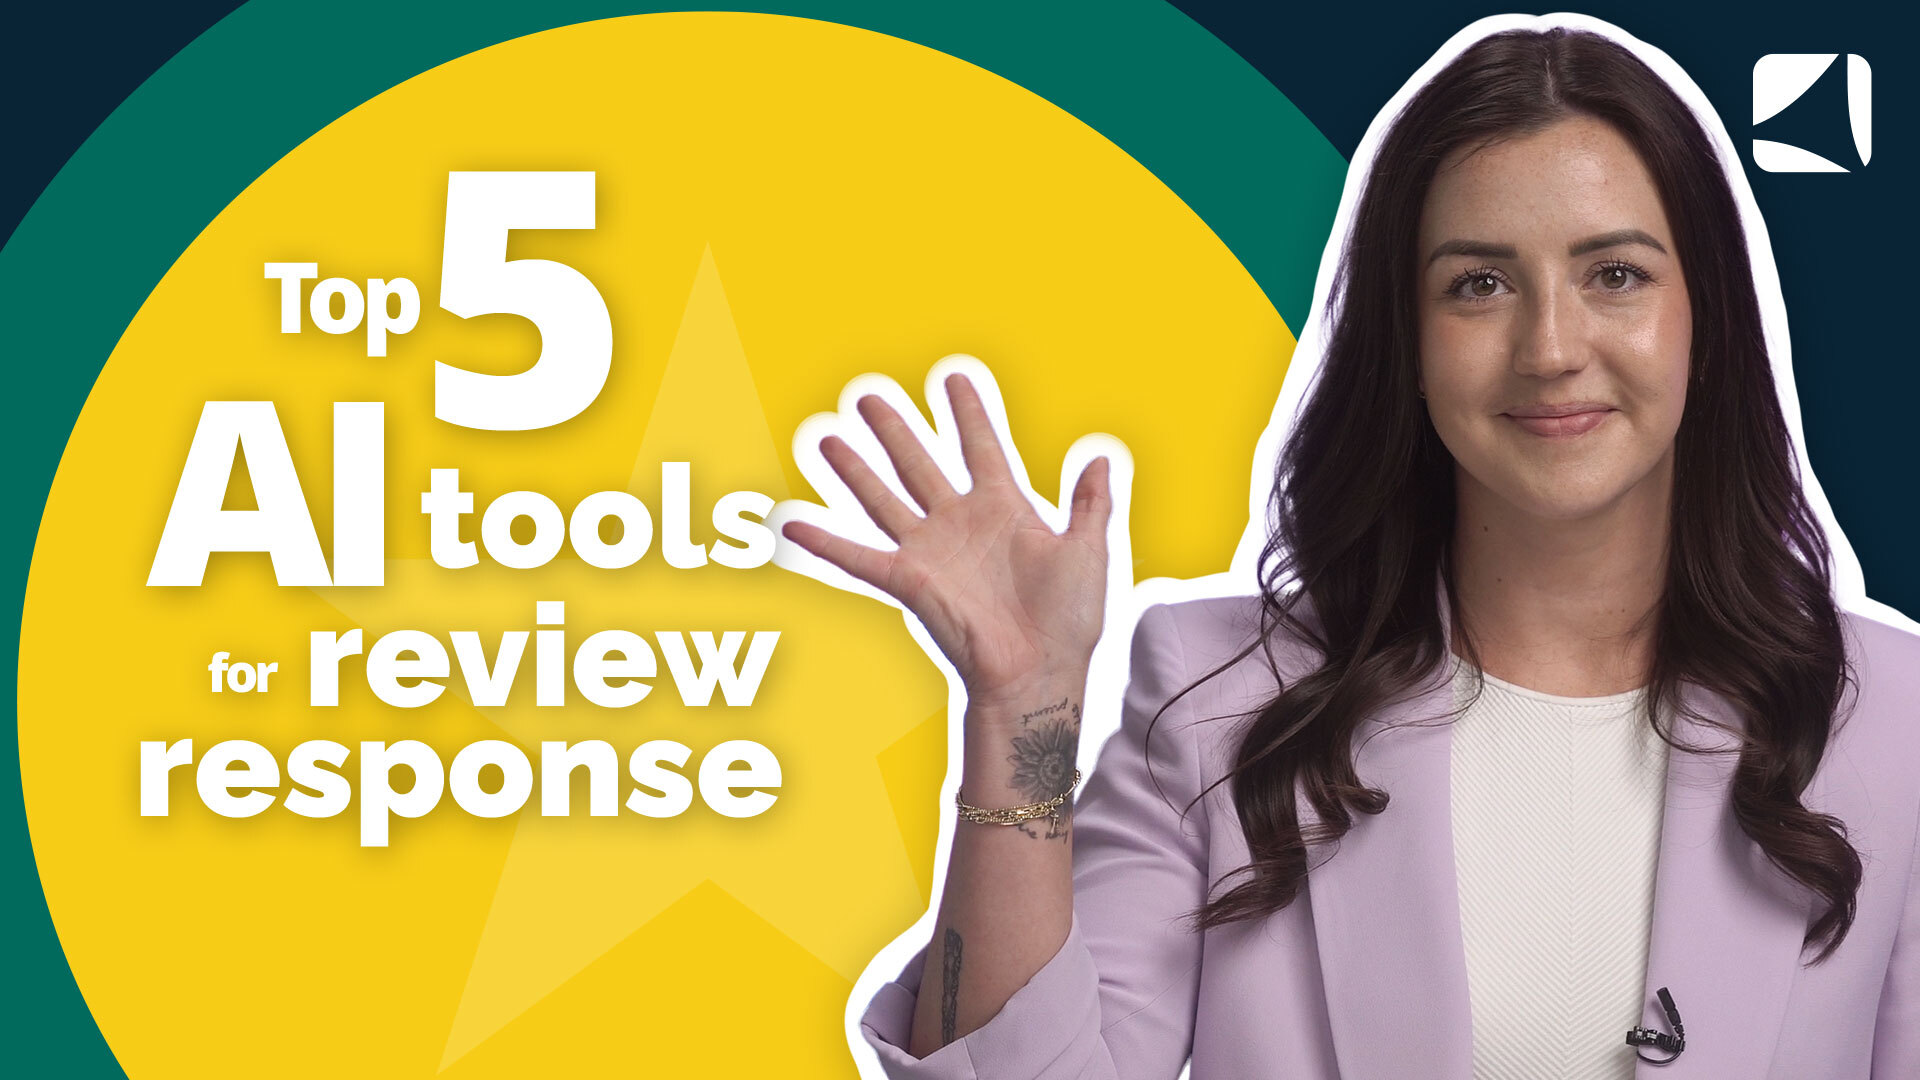 Top-5-AI-tools-for-review-response-YouTube-Thumbnail